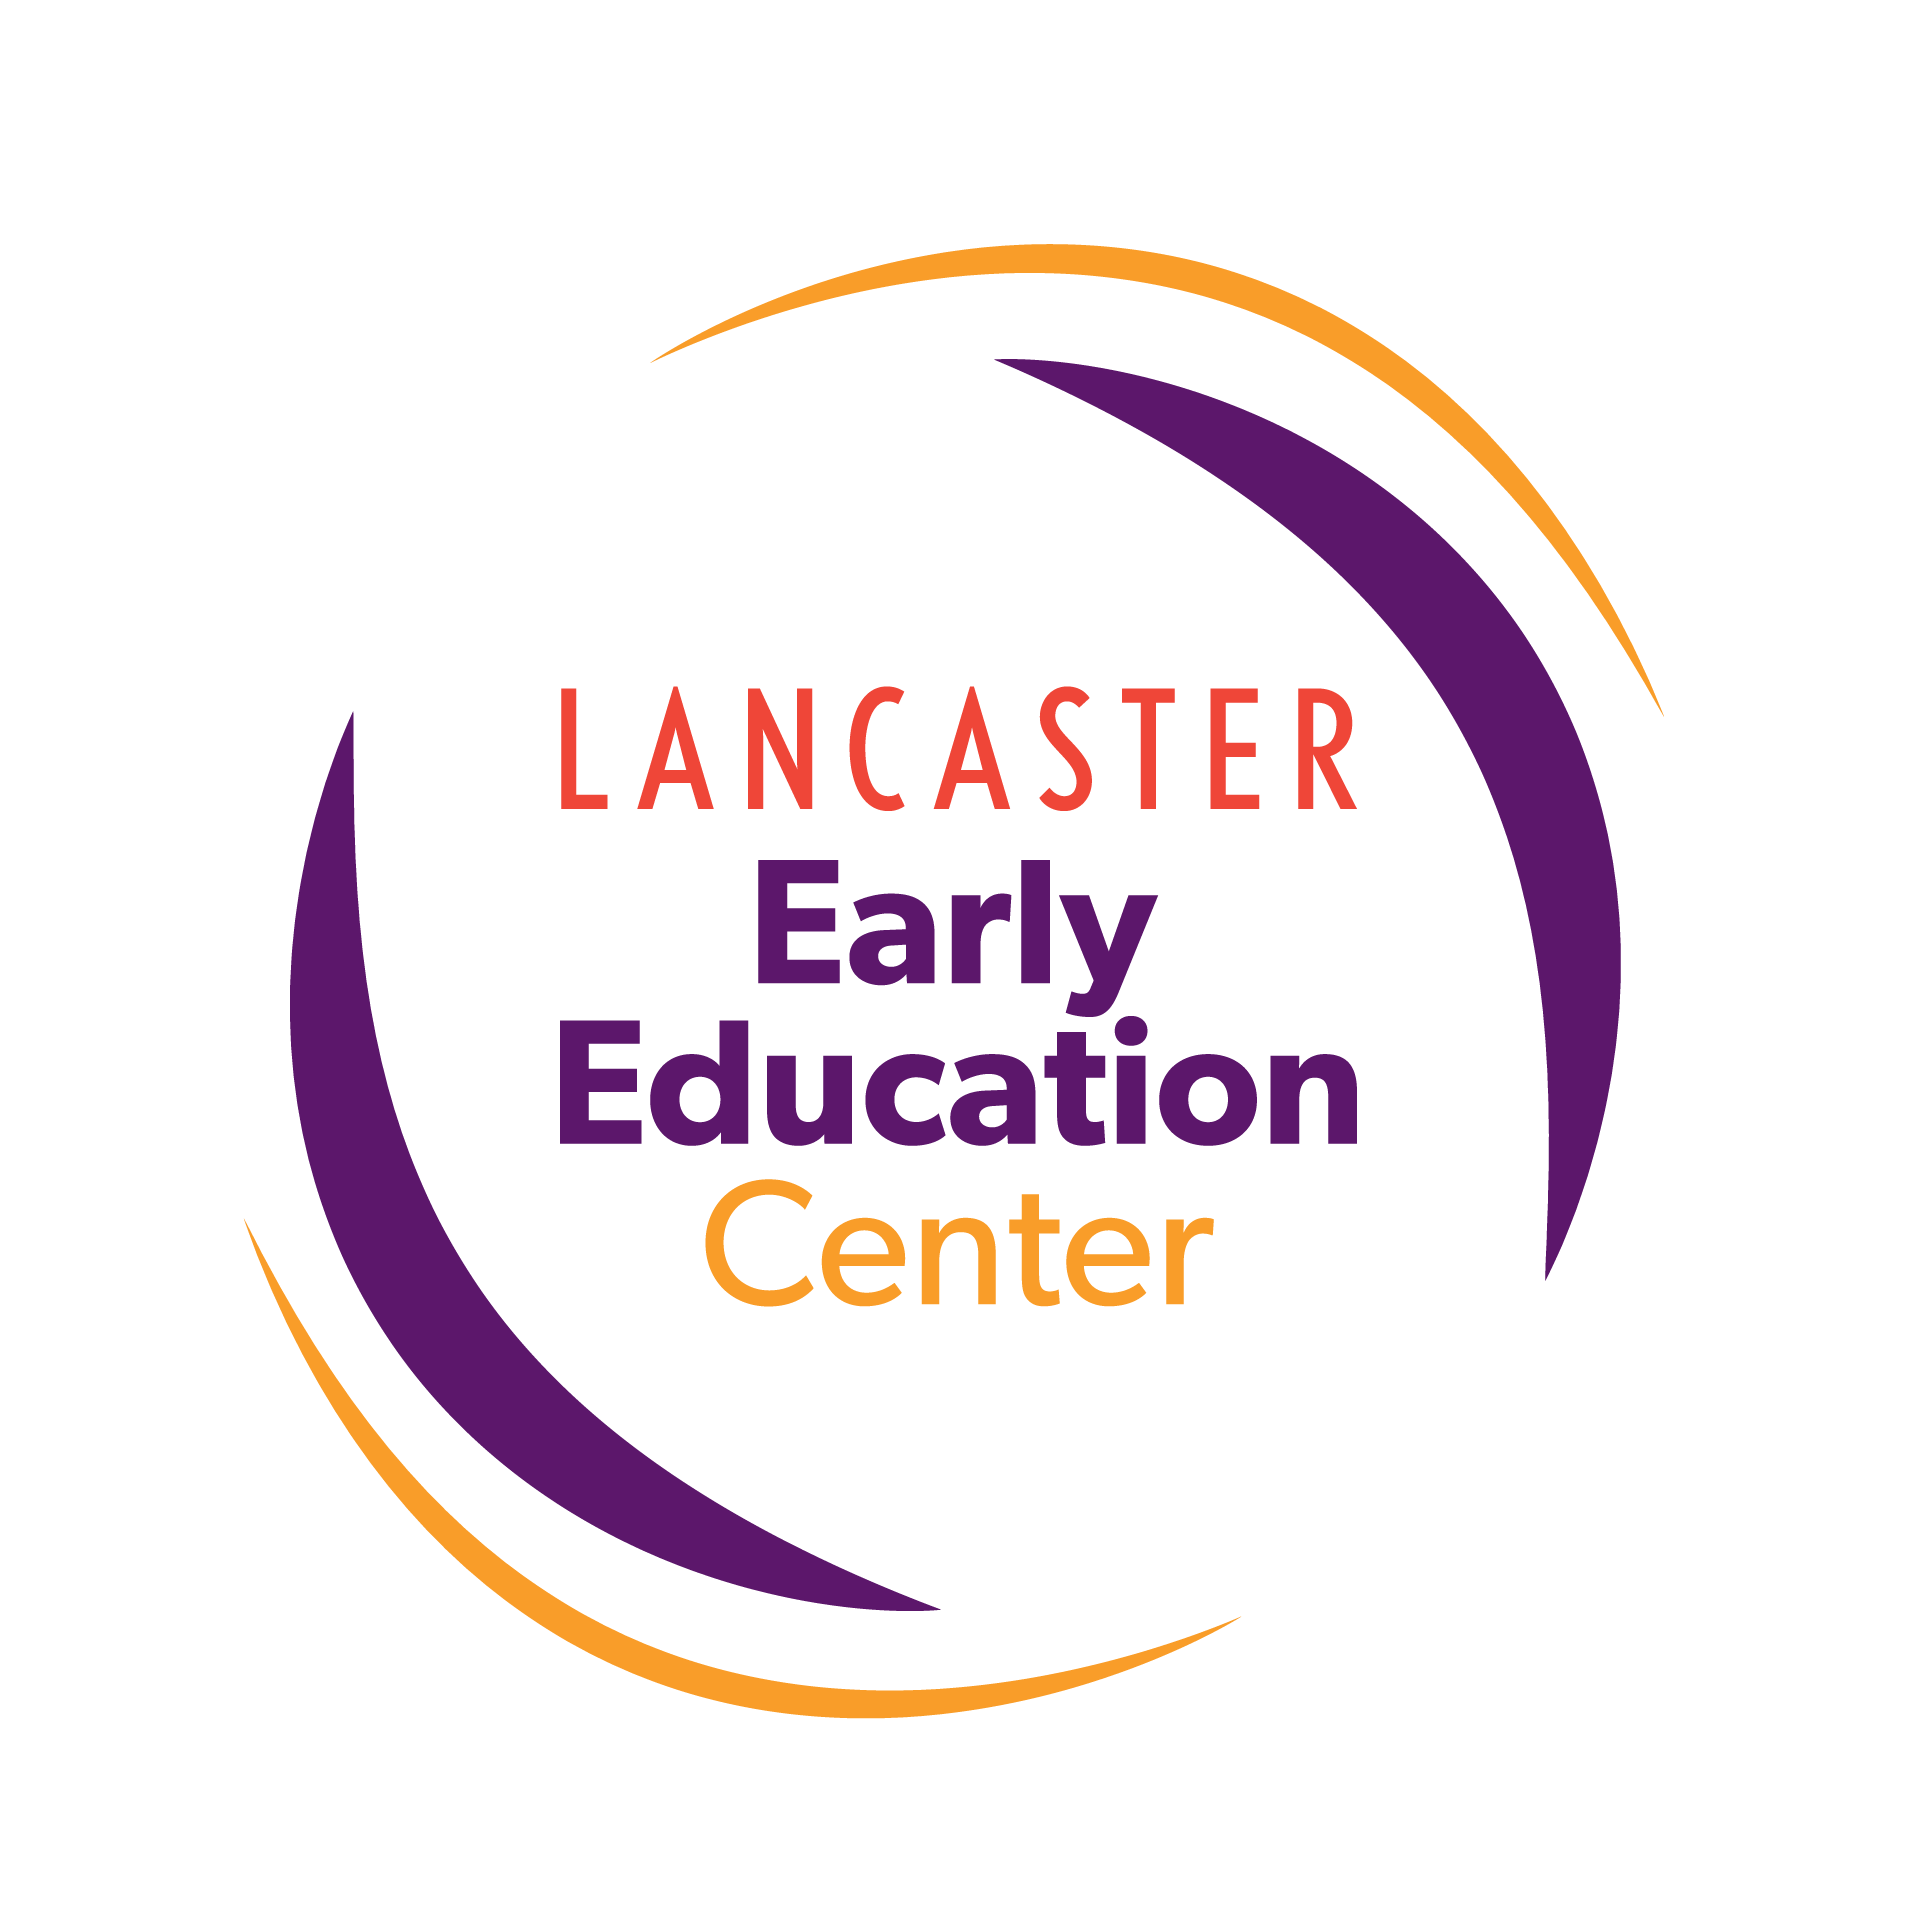 Lancaster Early Education Center formerly Lancaster Day Care Center Quality early care & education since 1915. in Downtown Lancaster, PA